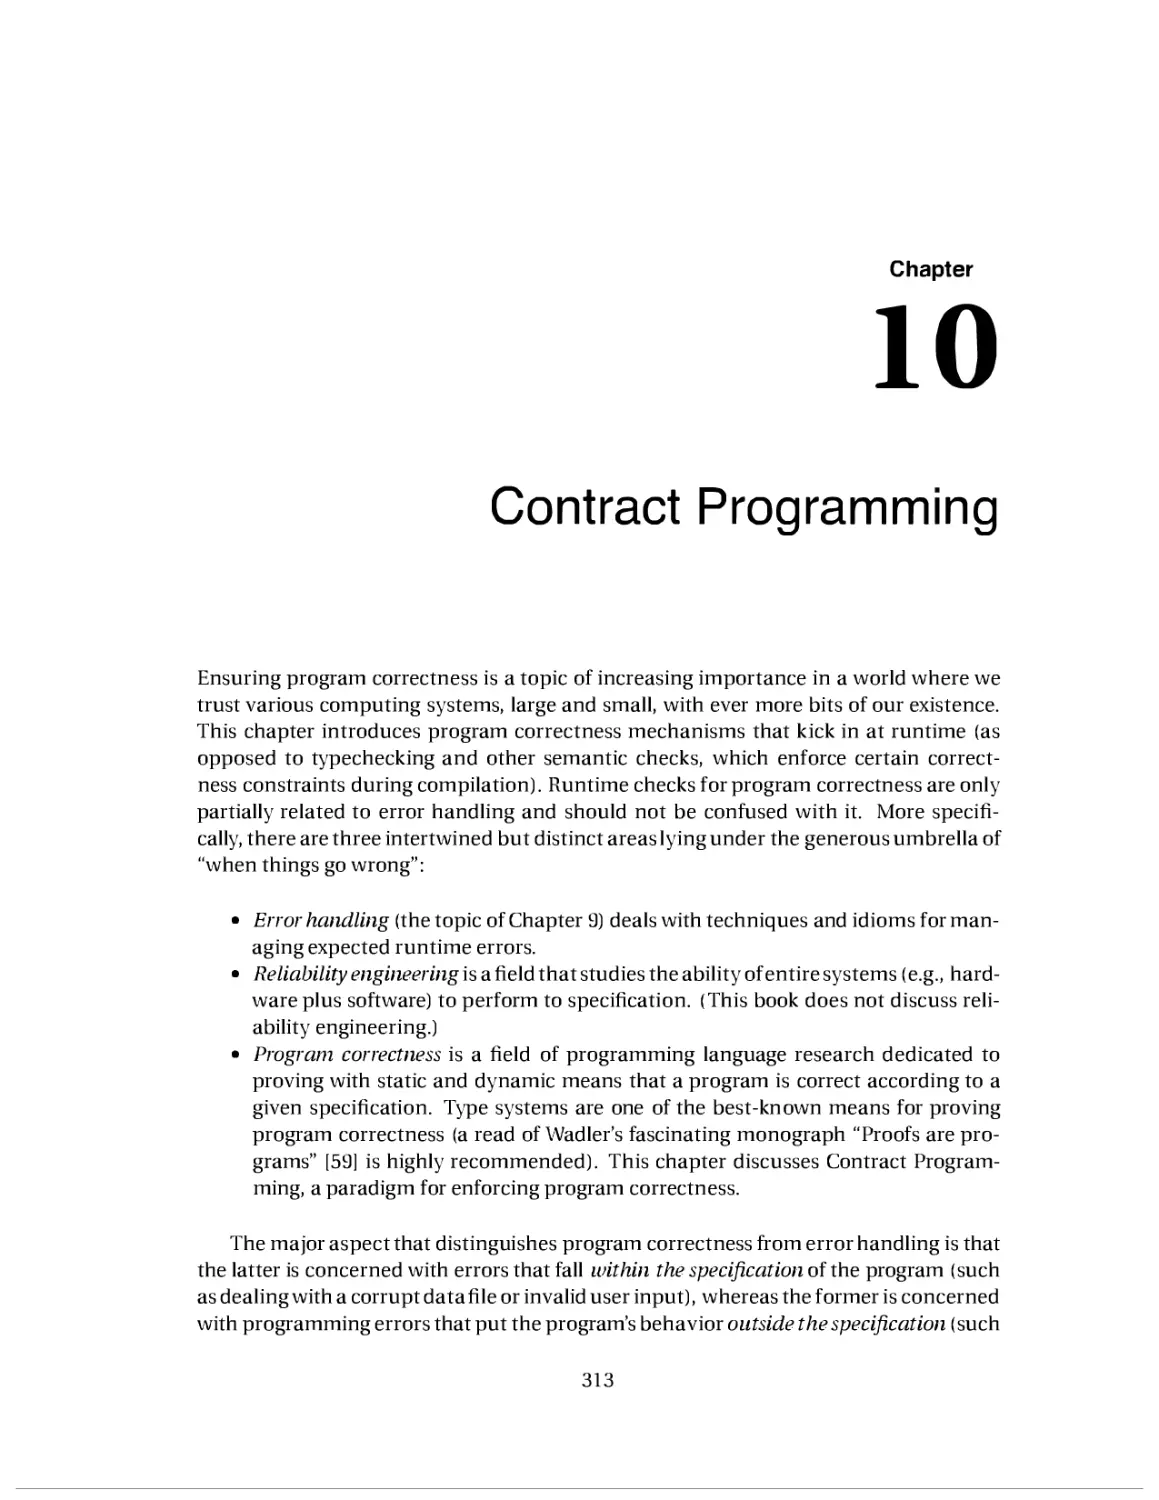 10. Contract Programming